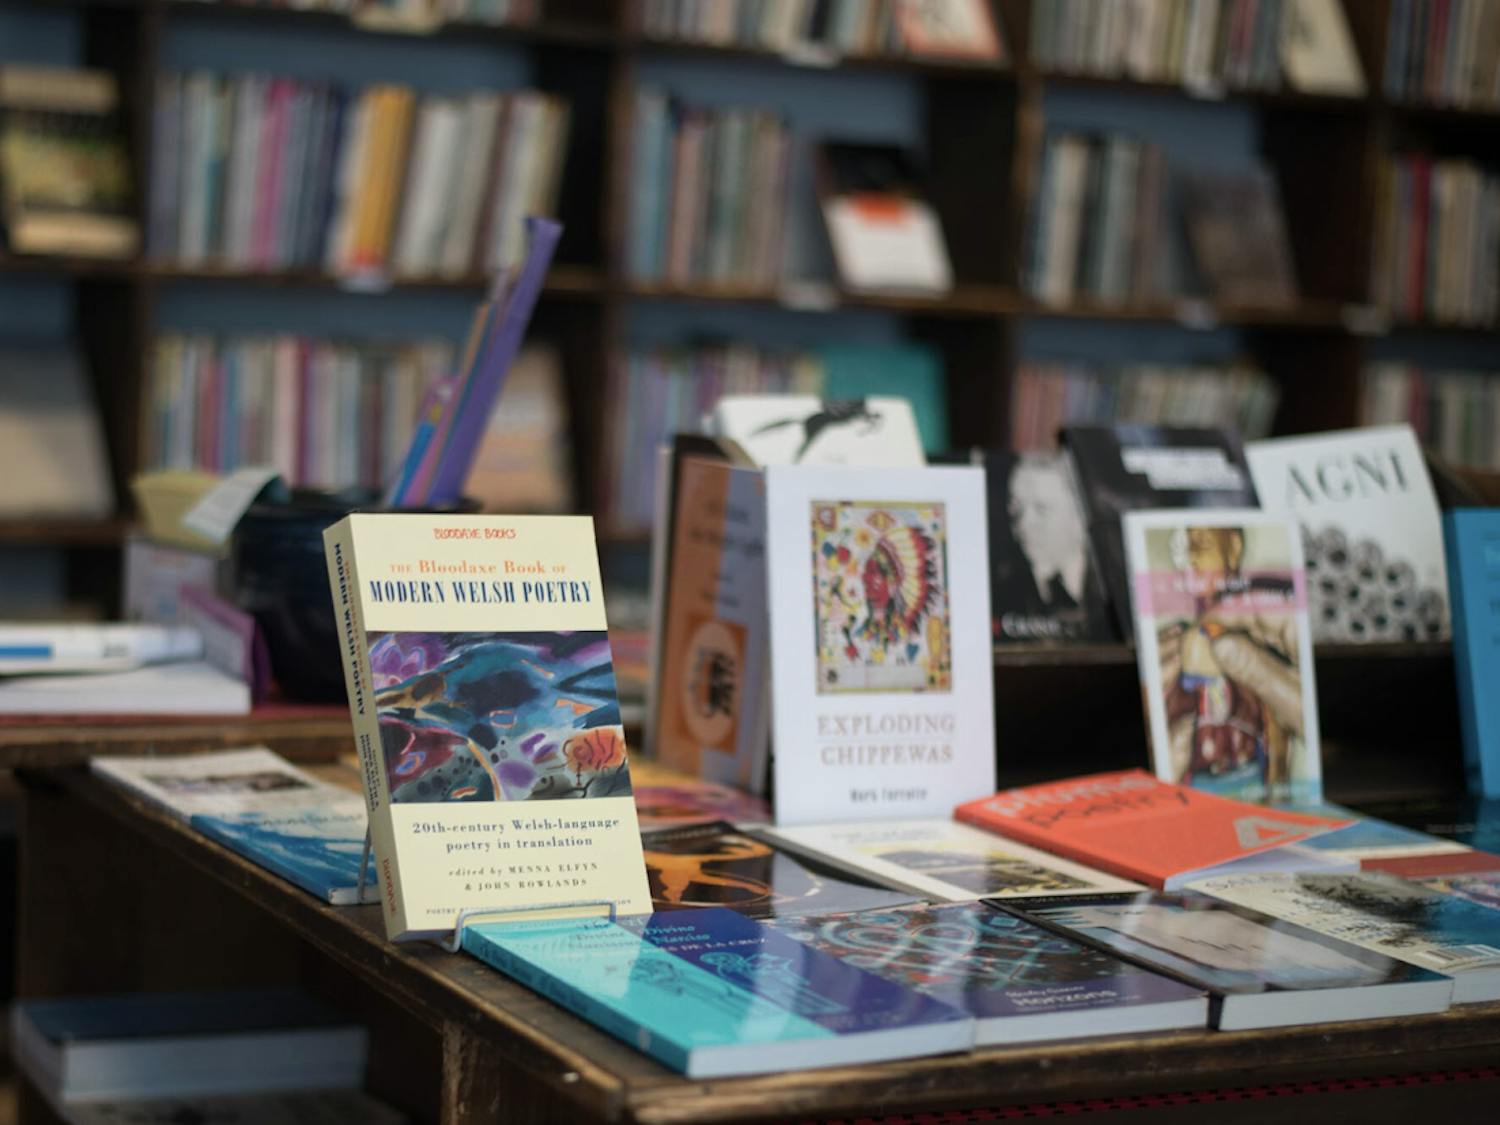 Books displayed on a table at Grolier Poetry Book Shop.